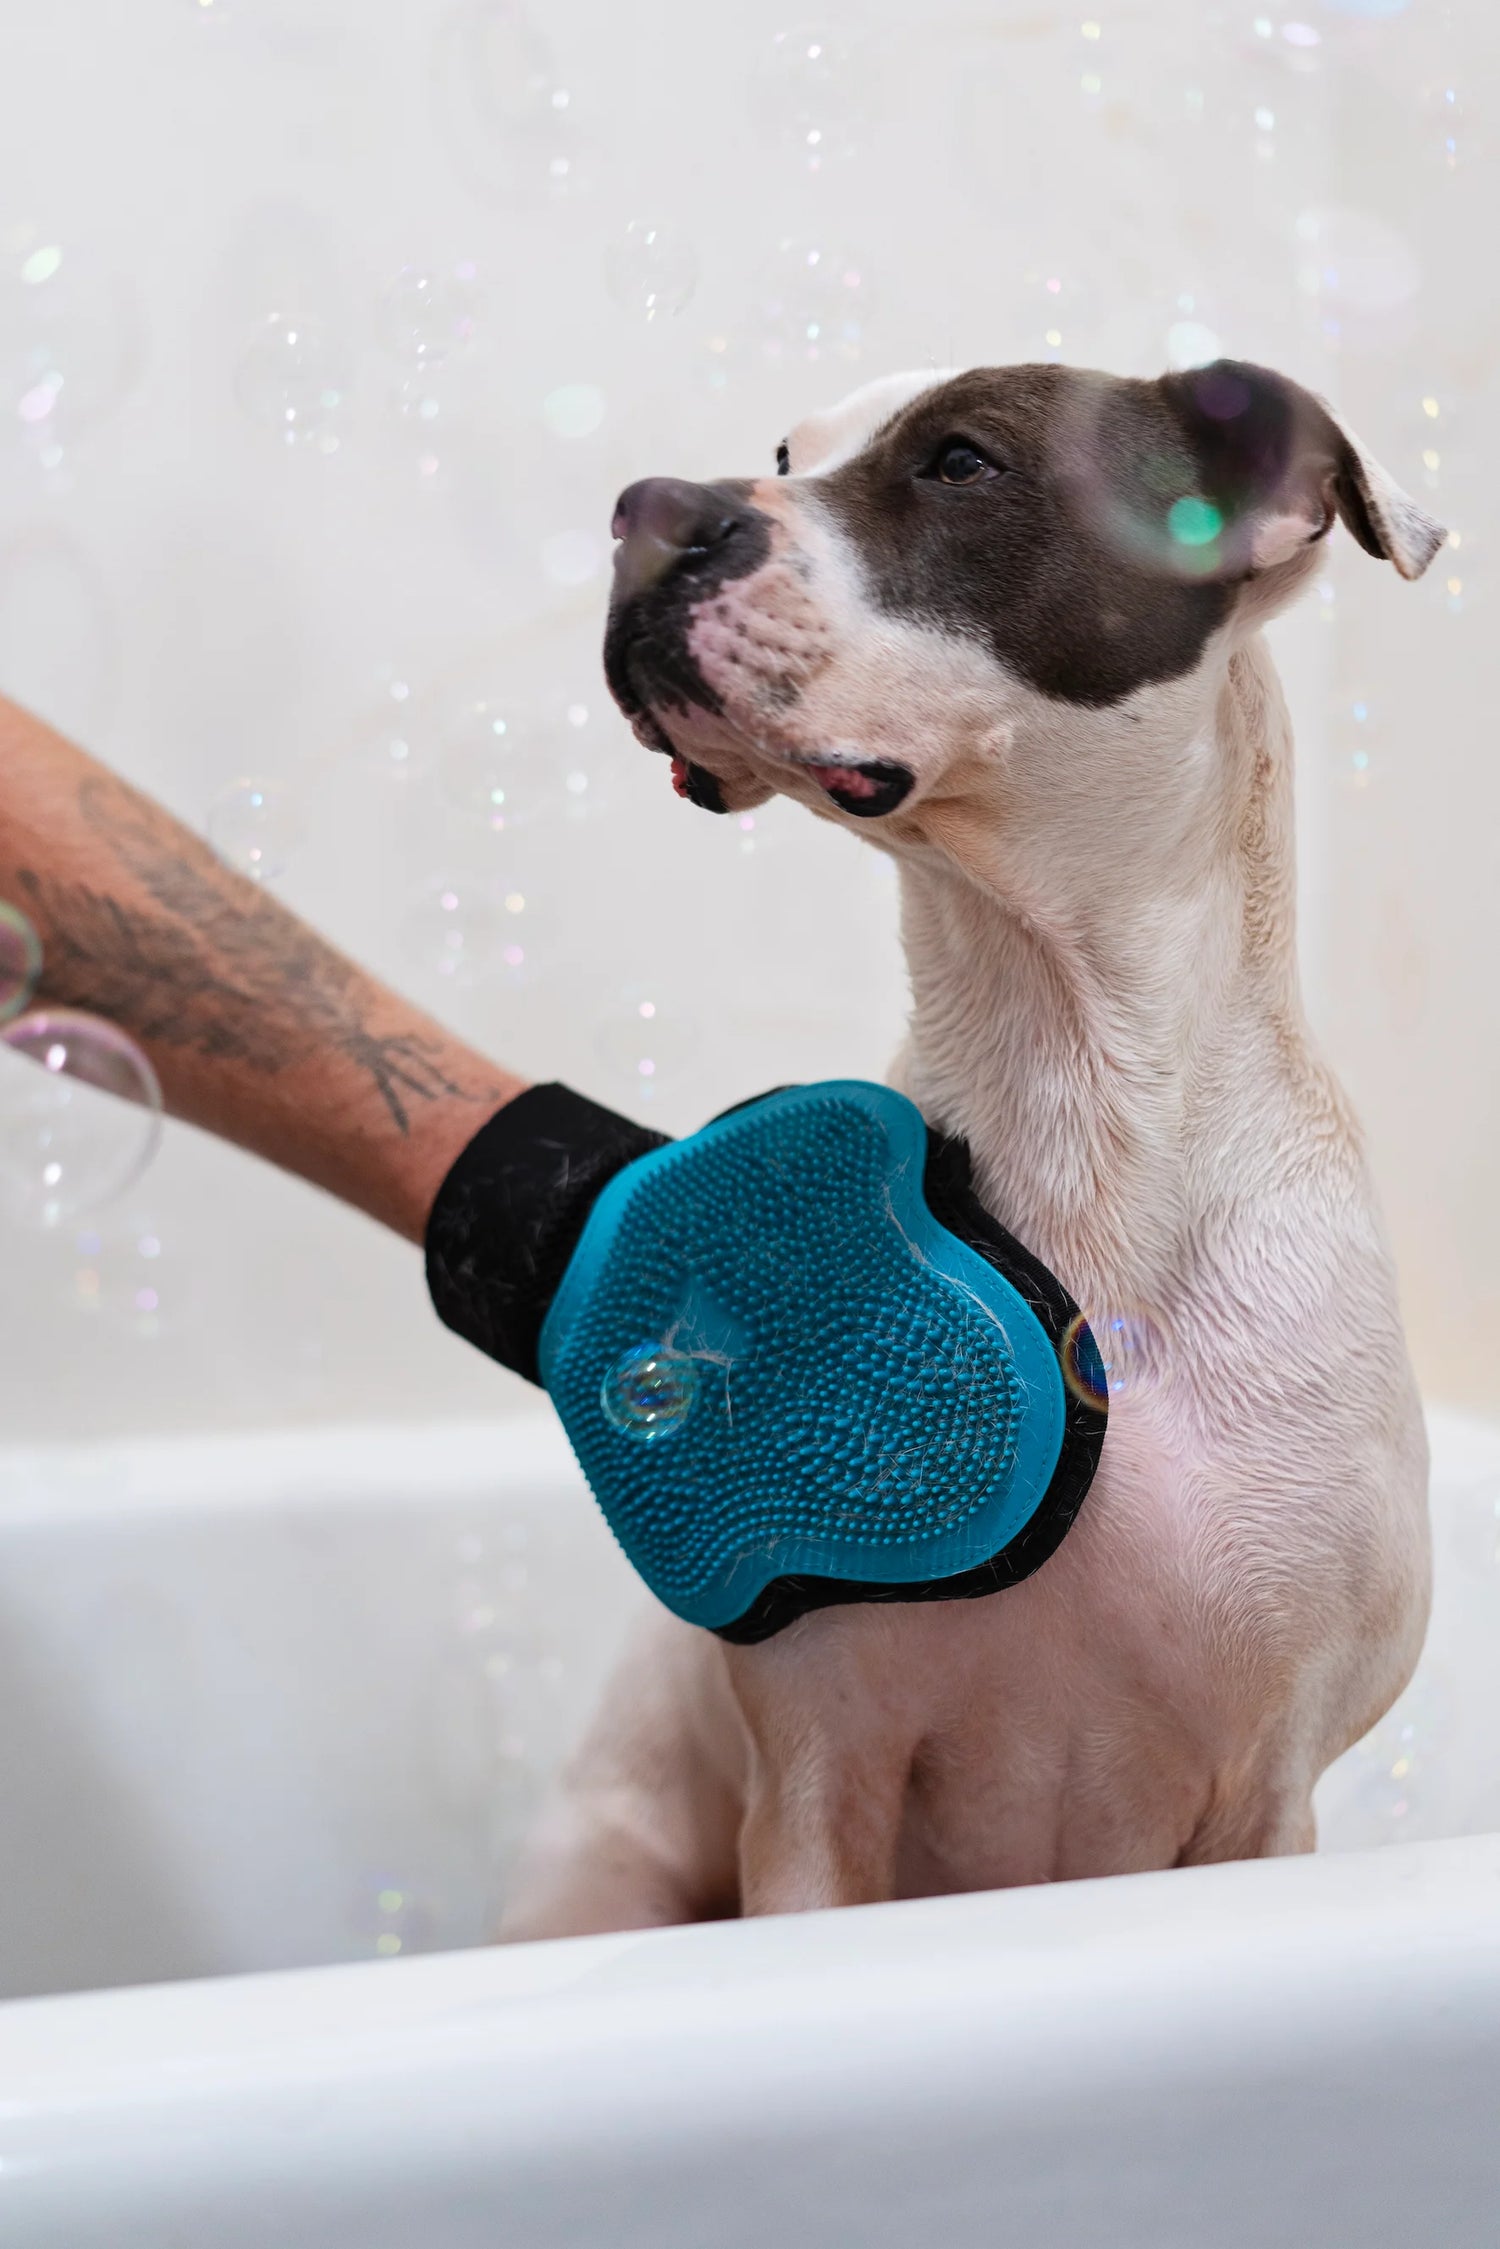 White spotted dog enjoying the bath being washed with microfiber and silicone mitt.